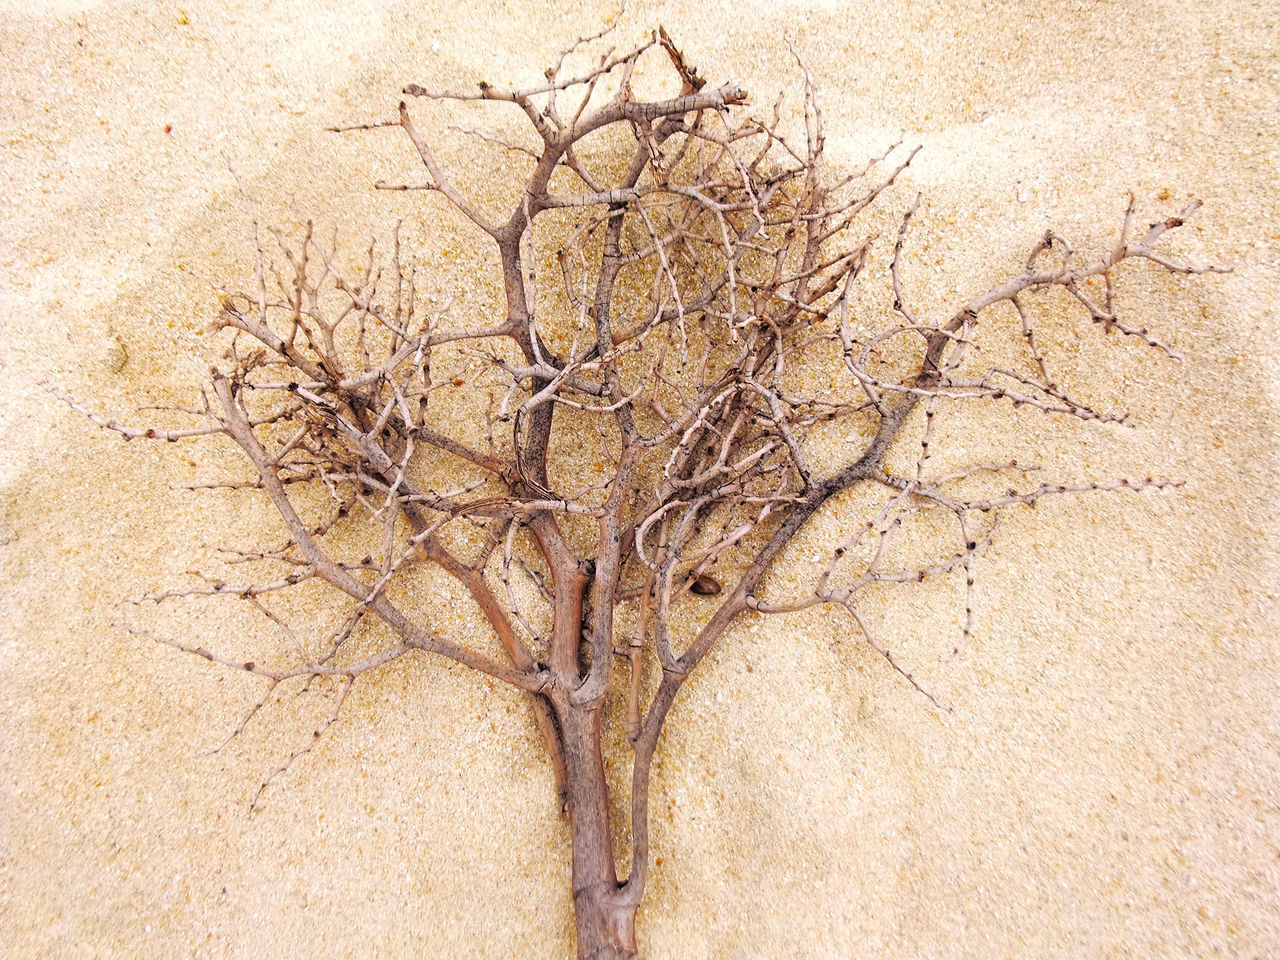 HIGH ANGLE VIEW OF DRY PLANT ON SAND